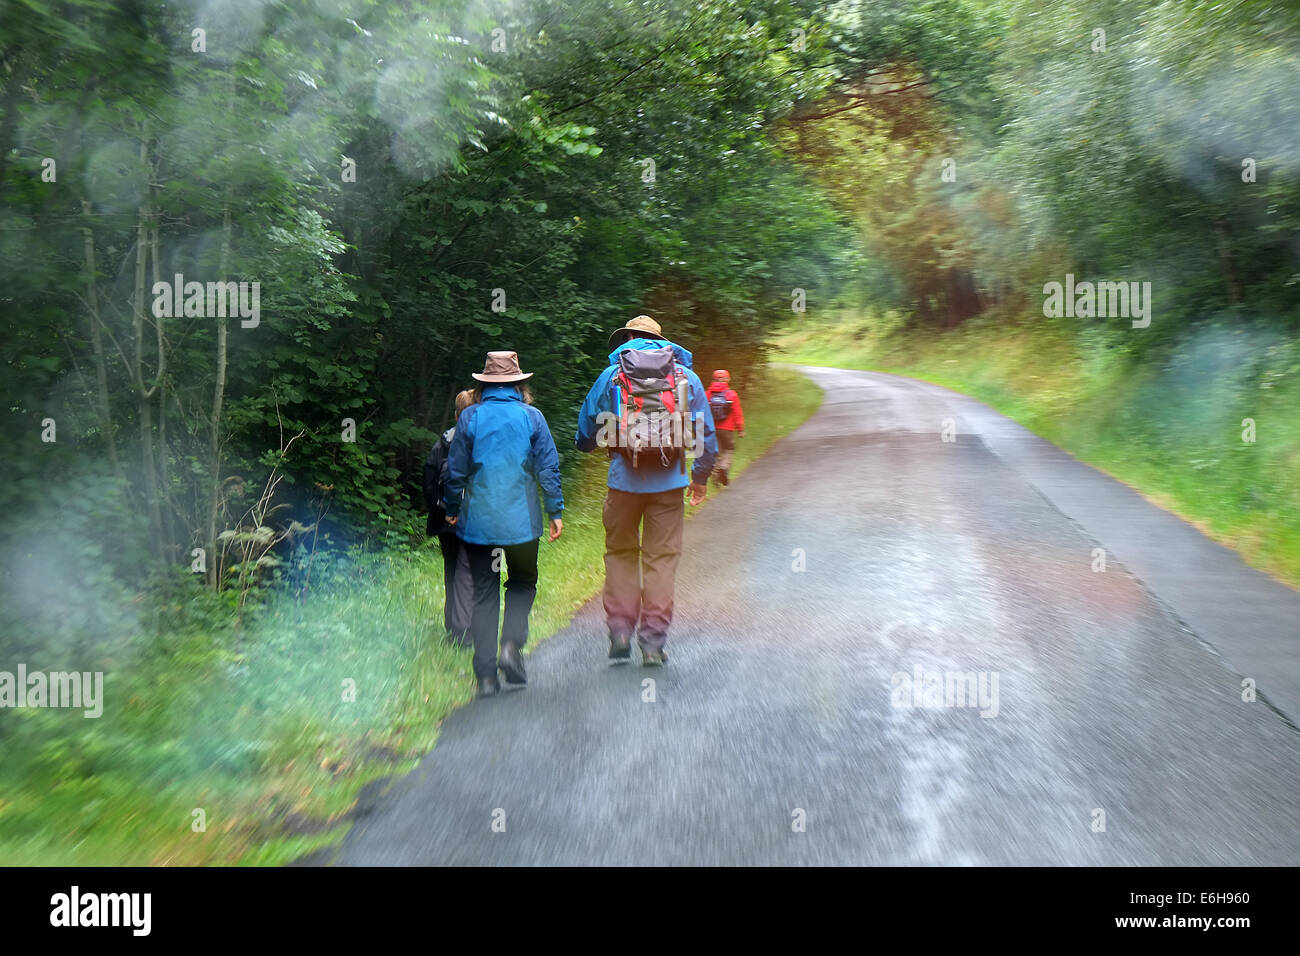 Group of people in wet weather clothes and rain walking in woodland. Stock Photo